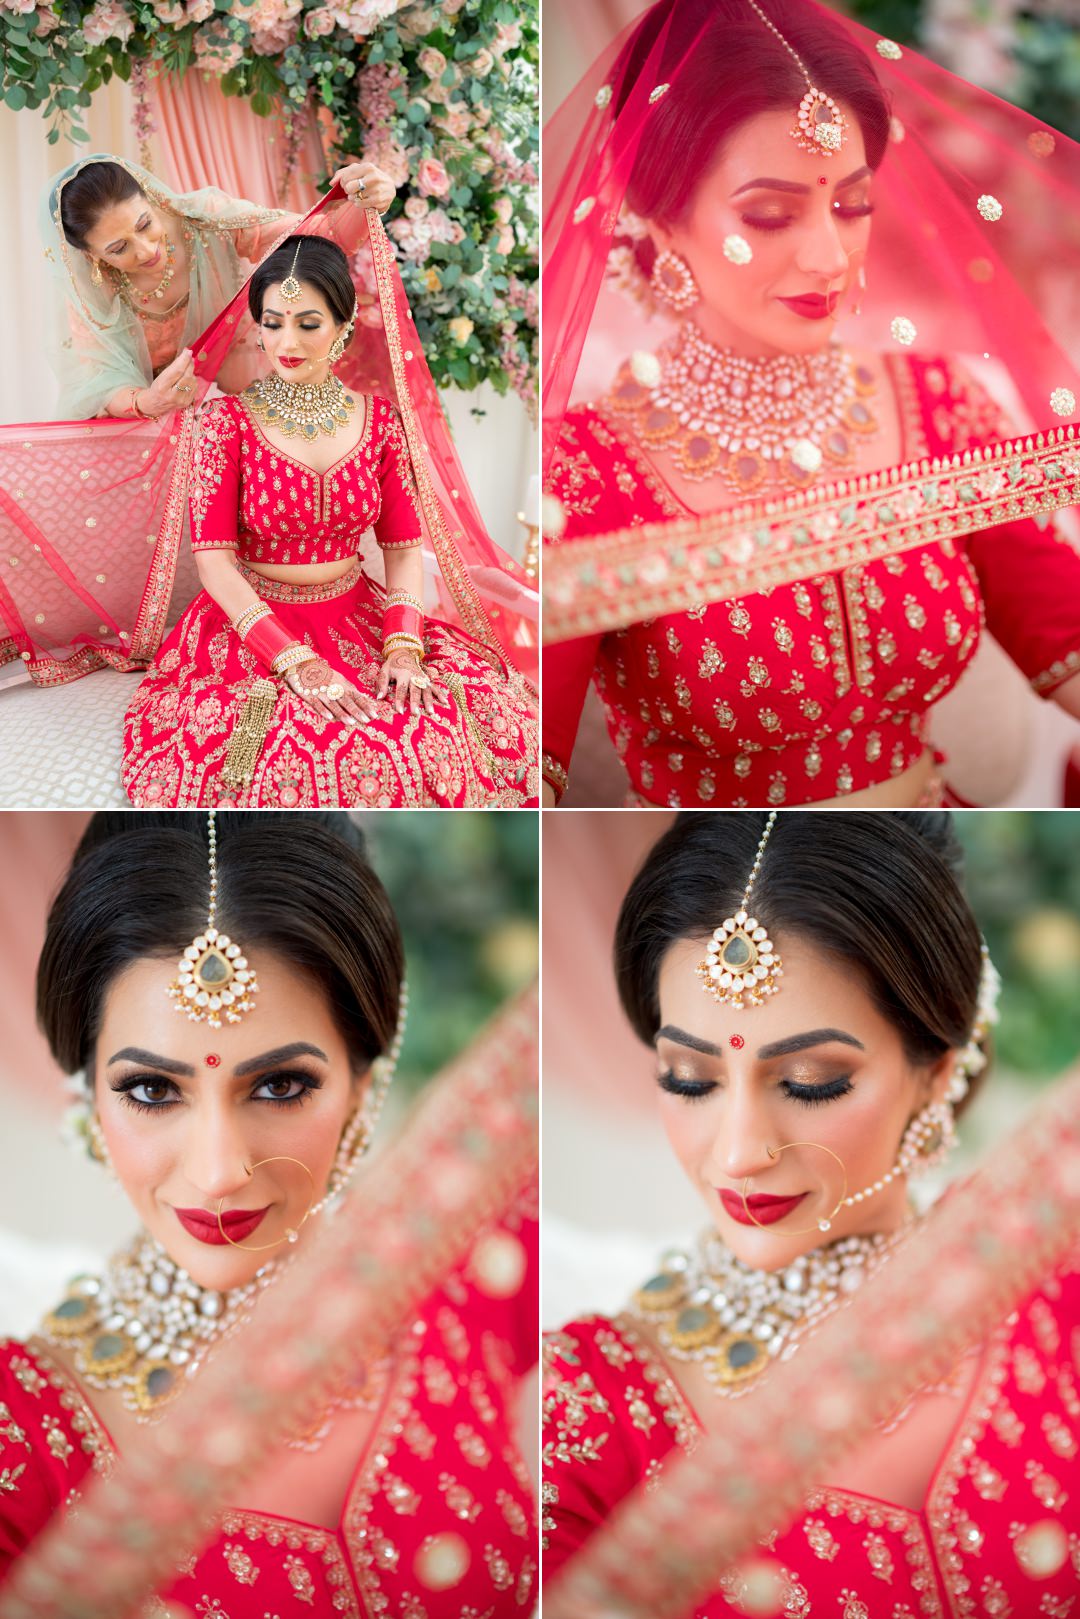 Stunning Punjabi bride on her wedding morning, following the chunni being placed on her head